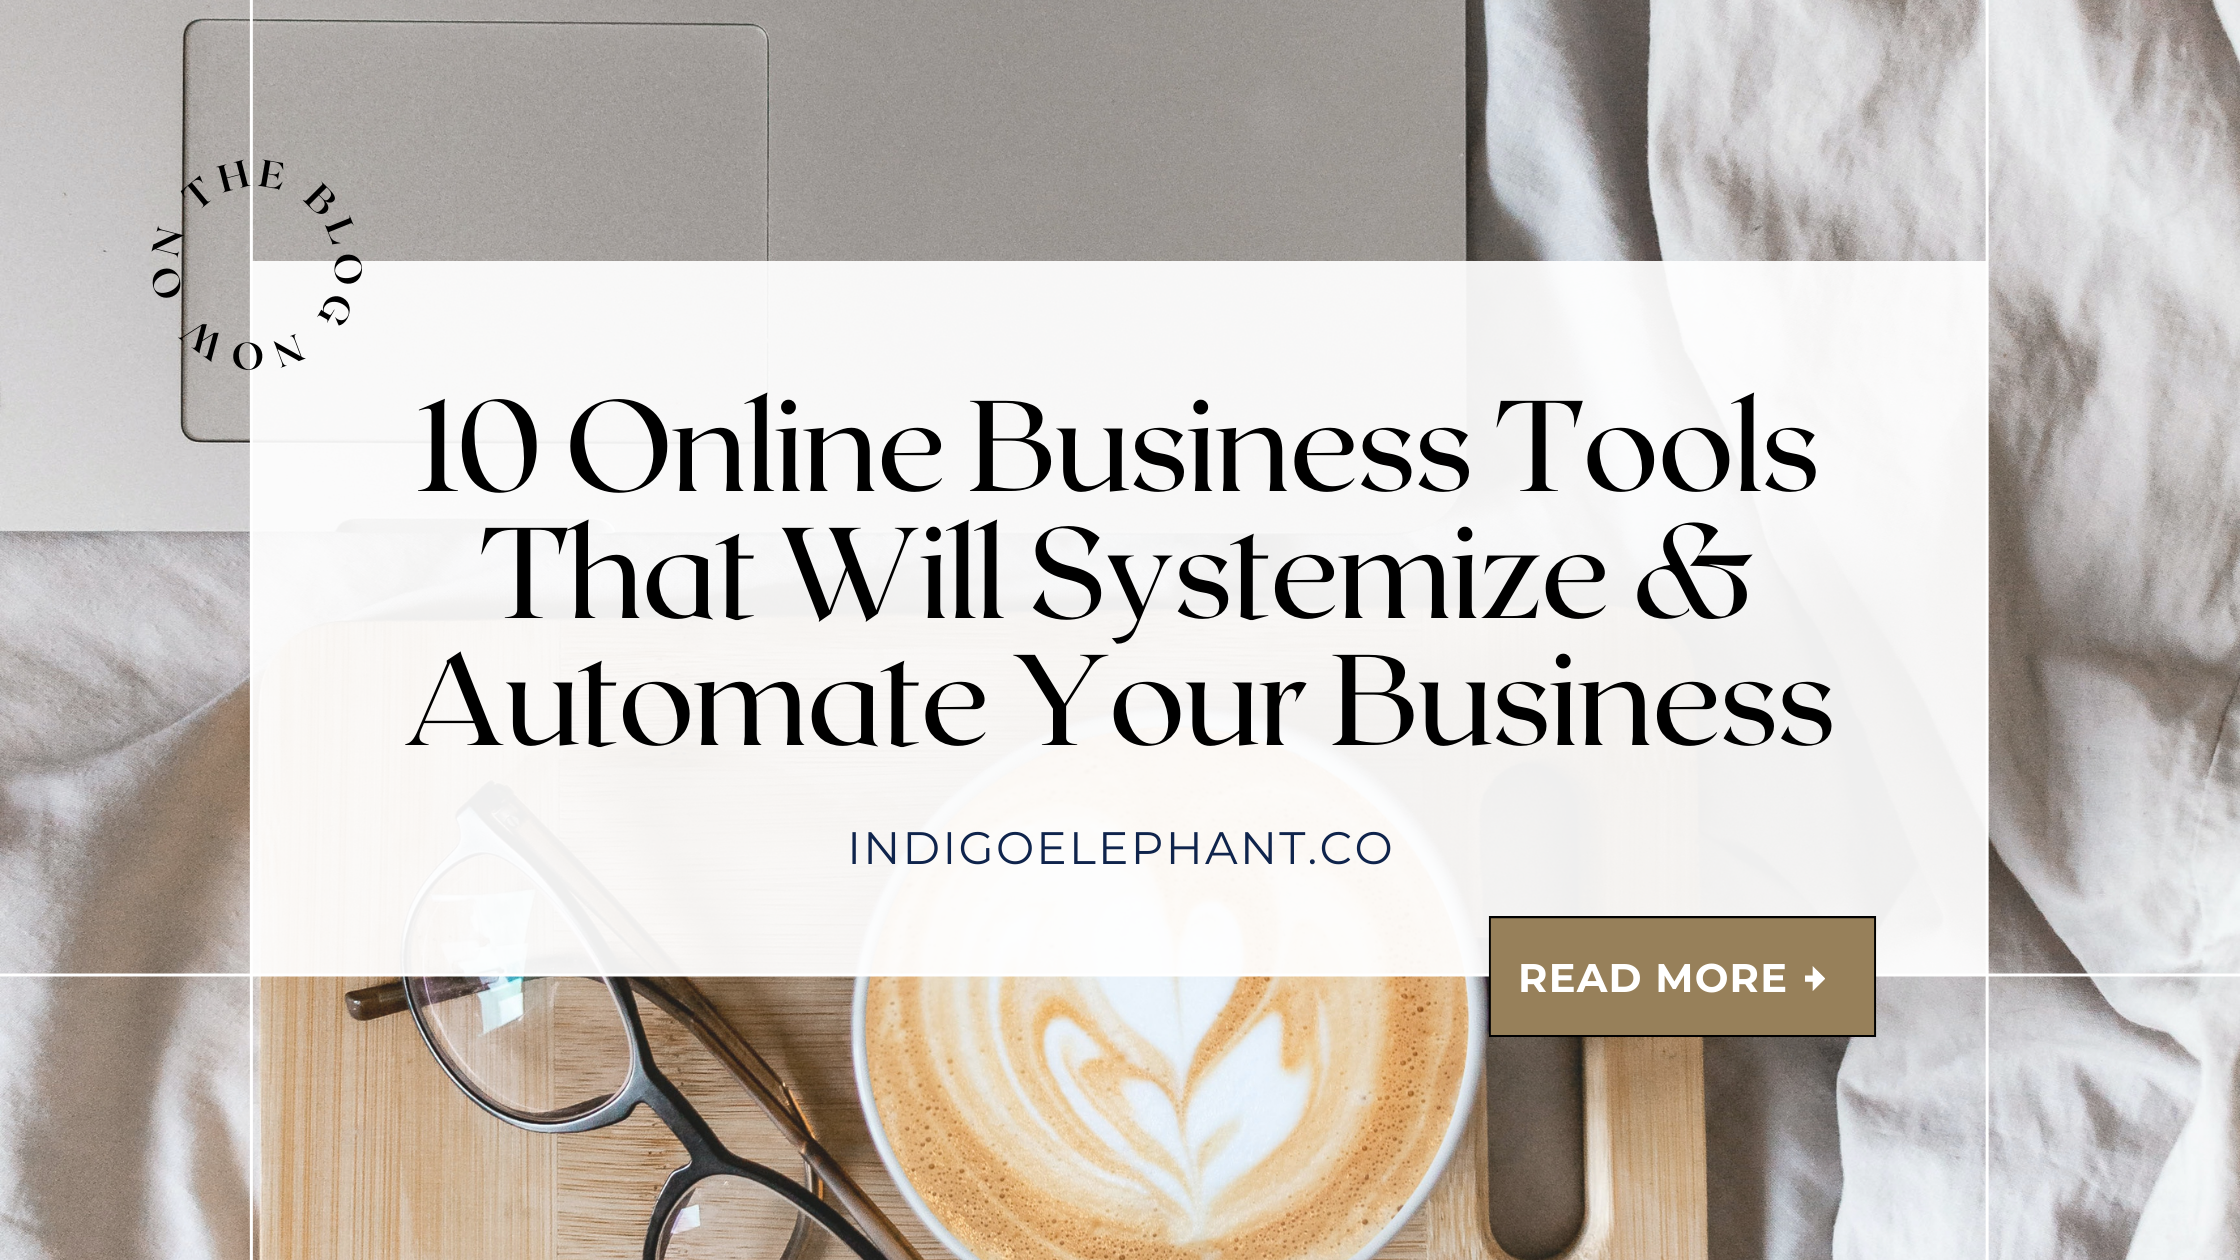 10 Online Business Tools That Will Systemize & Automate Your Business